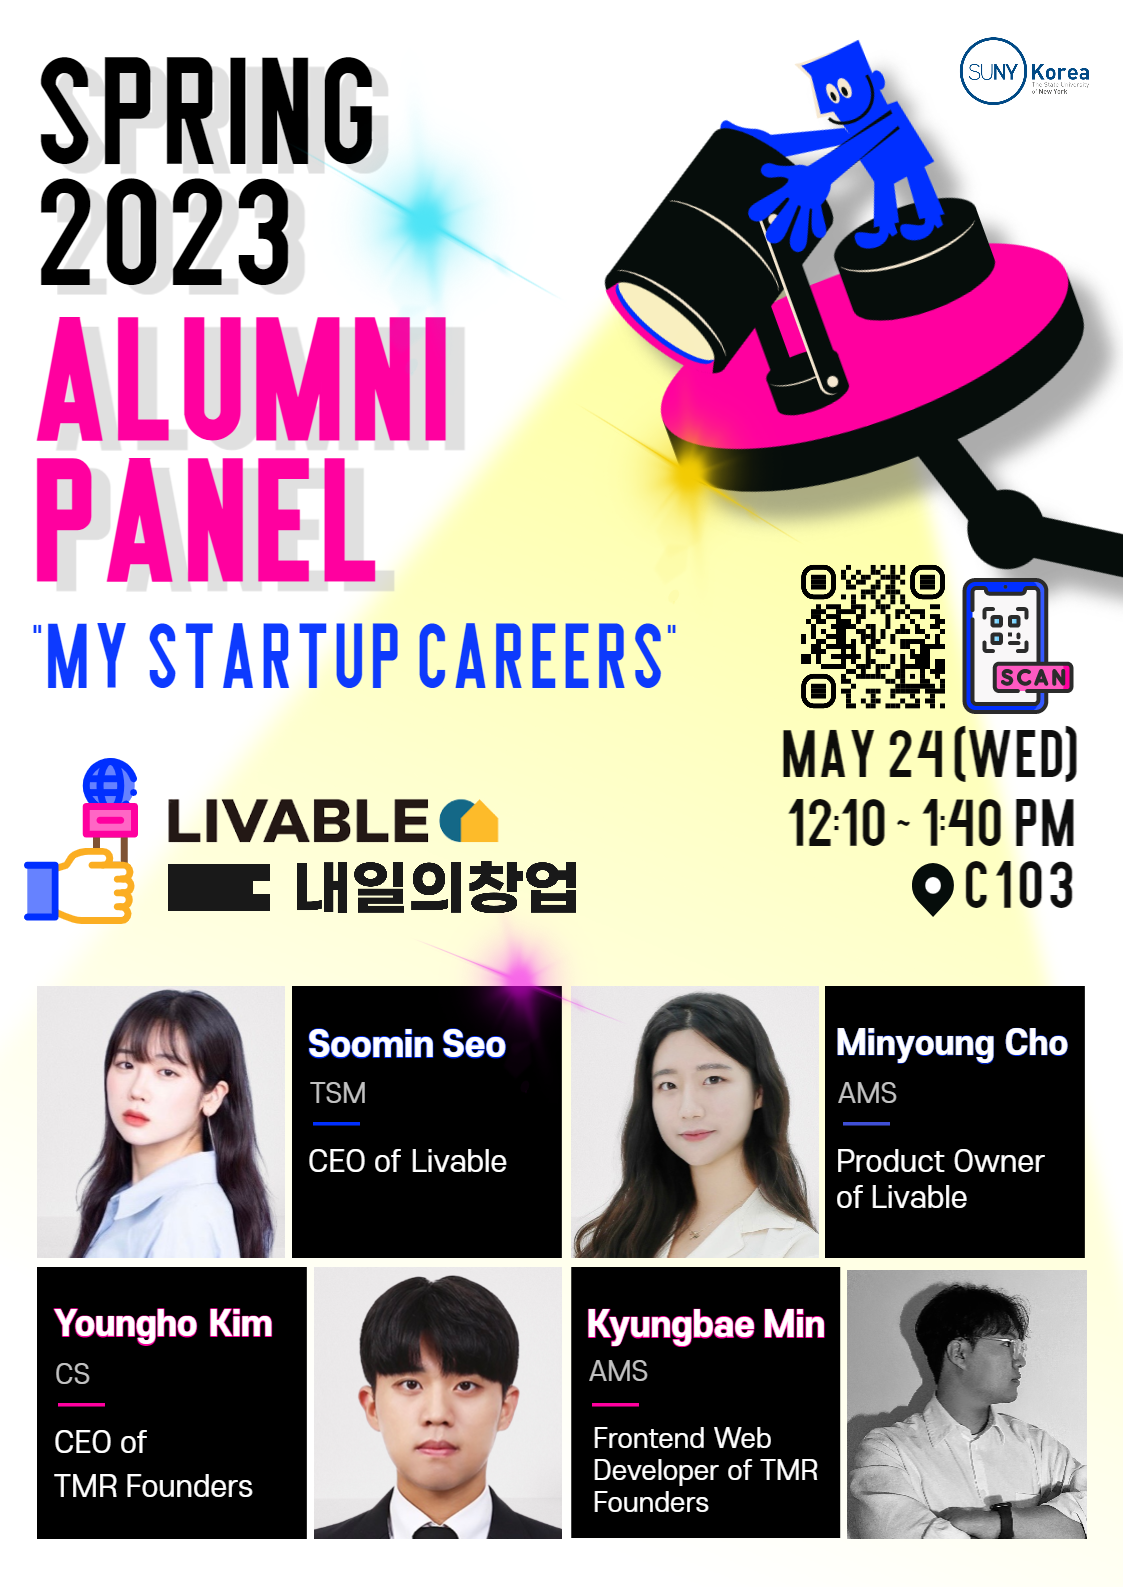 SUNY Korea SPRING 2023 ALUMNI PANEL “MY STARTUP CAREERS” QR코드(https://me-qr.com/ko/0djqWN1M) MAY24(WED) 12:10~1:40PM C103 / LIVABLE 내일의 창업 / Soomin Seo TSM CEO of Livable. Minyoung Cho AMS Product Owner of Livable. Youngho Kim CS CEO of TMR Founders. Kyungbae Min AMS Frontend Web Developer of TMR Founders